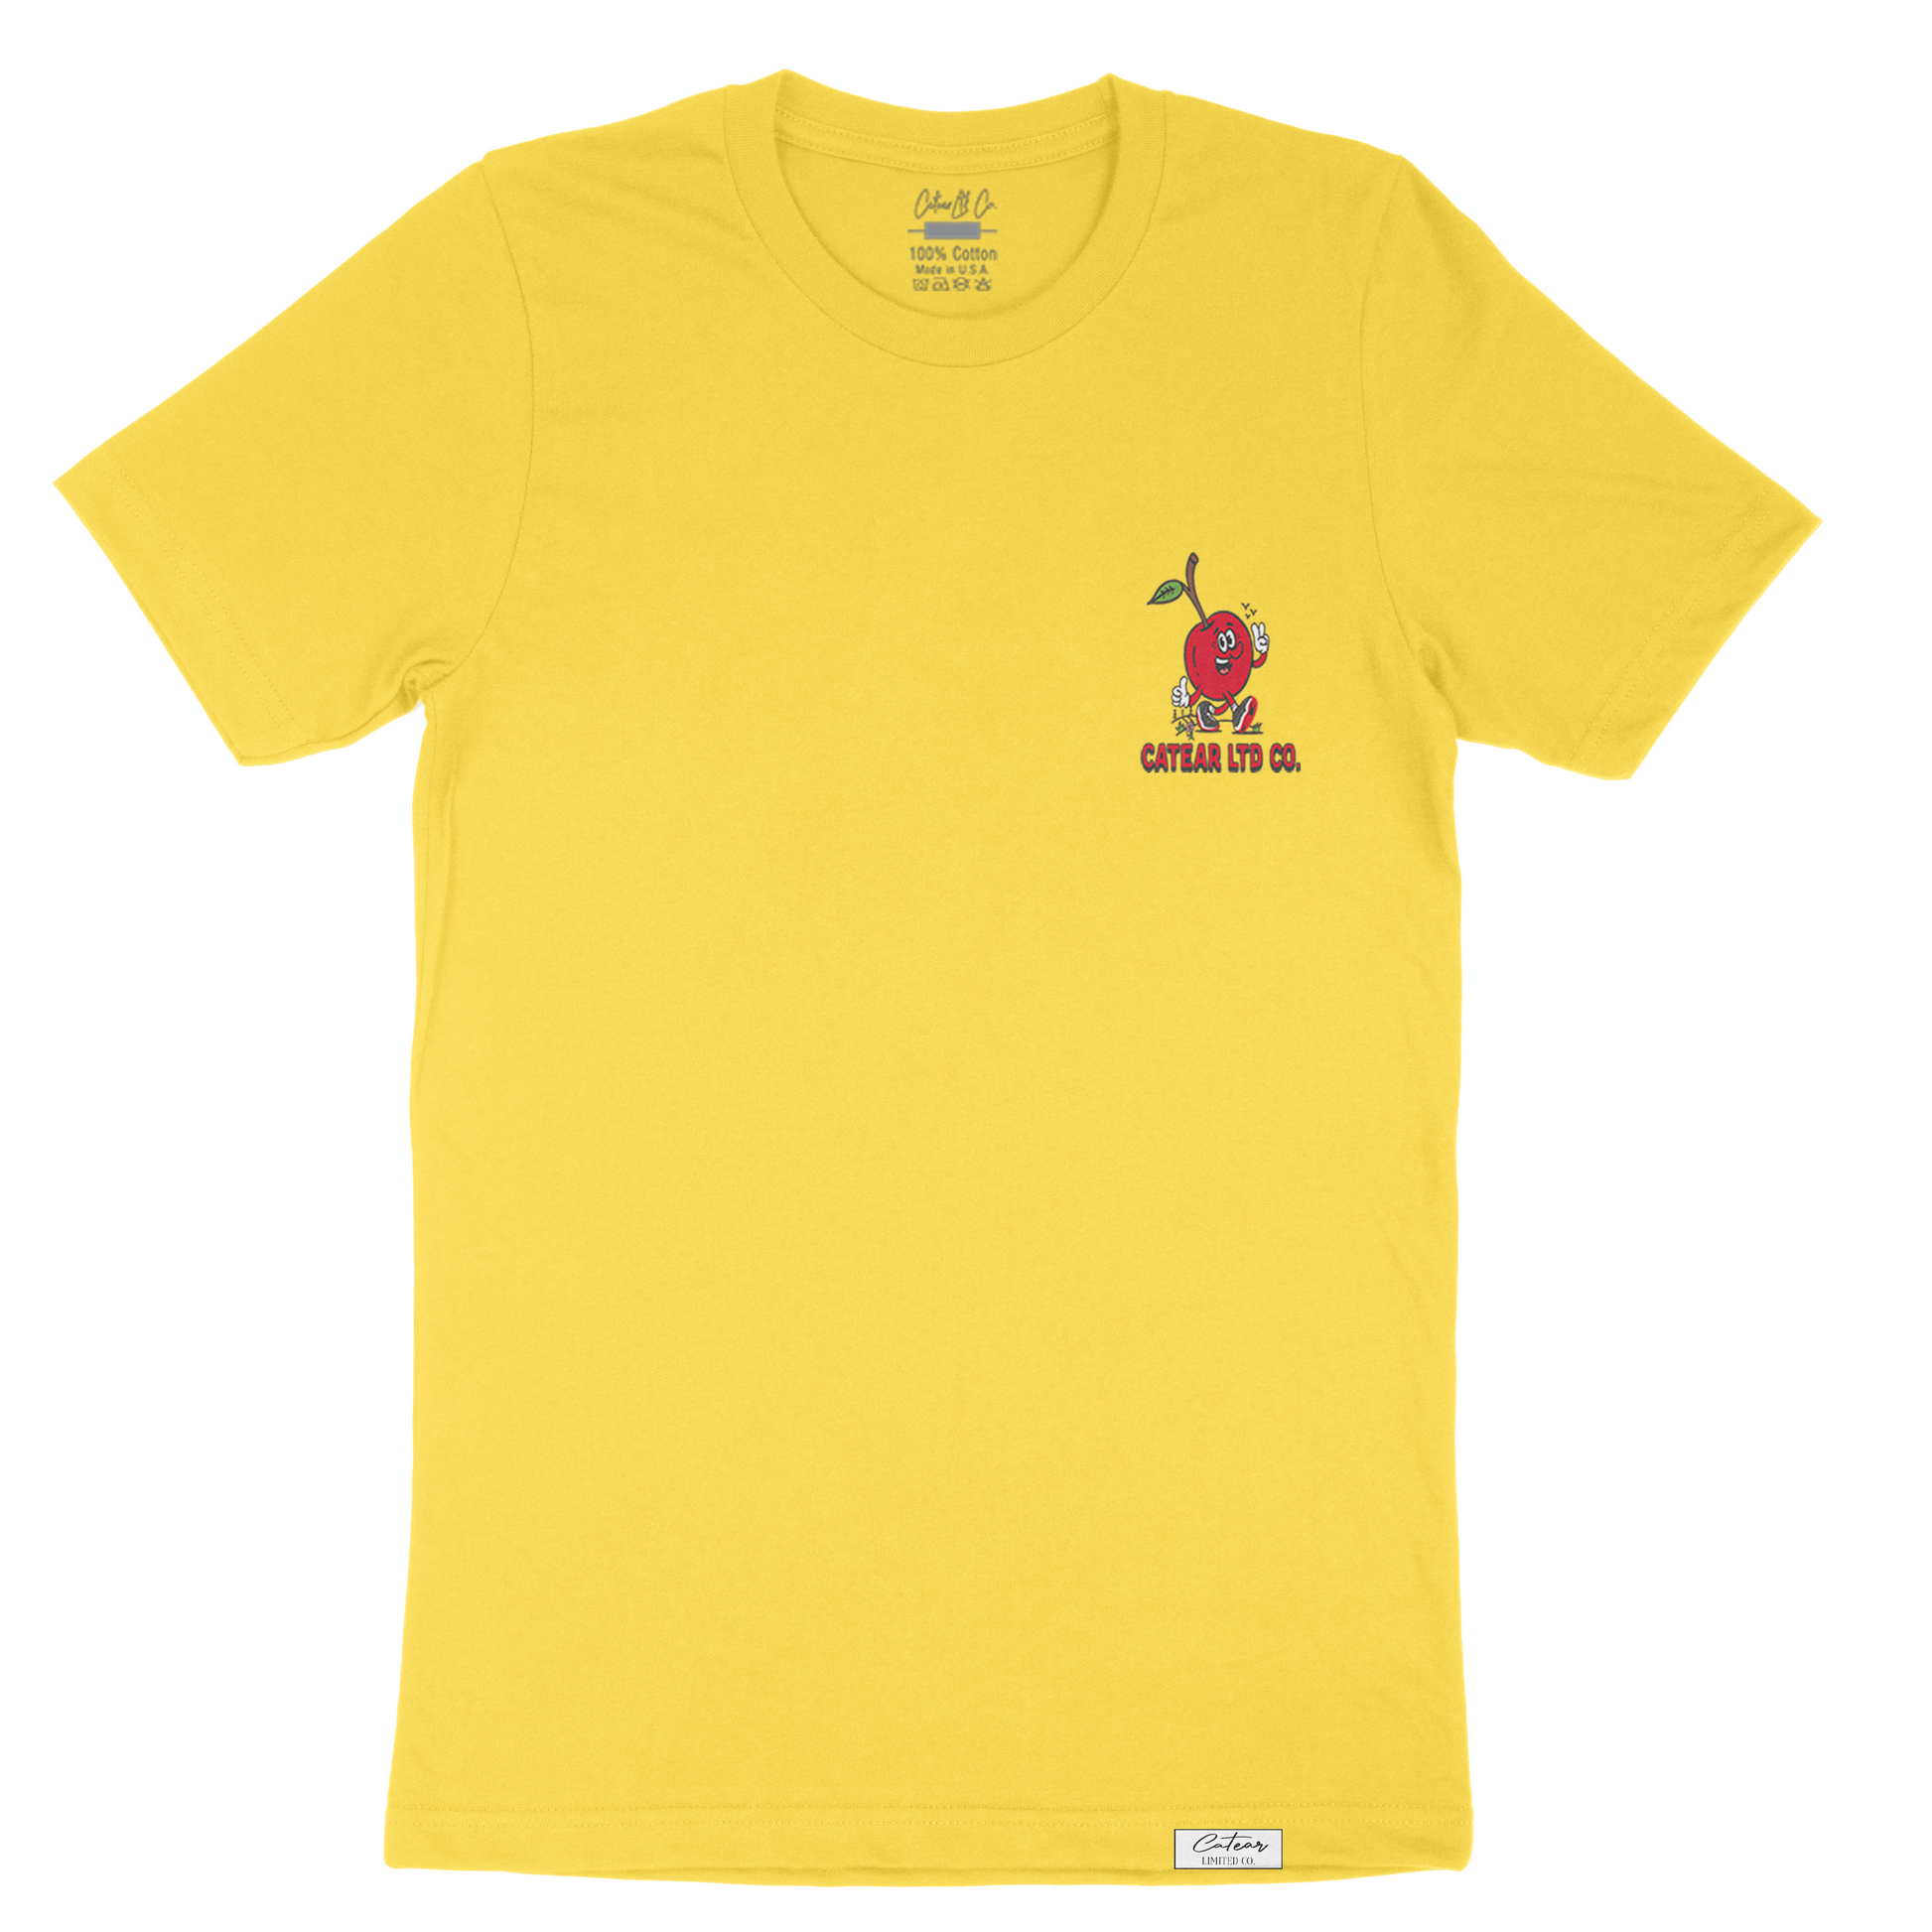 Unisex Yellow color tee with walking cherry & CATEAR brand name screen printed on the front left chest, woven label on bottom left. Relaxed Fit & great feel.